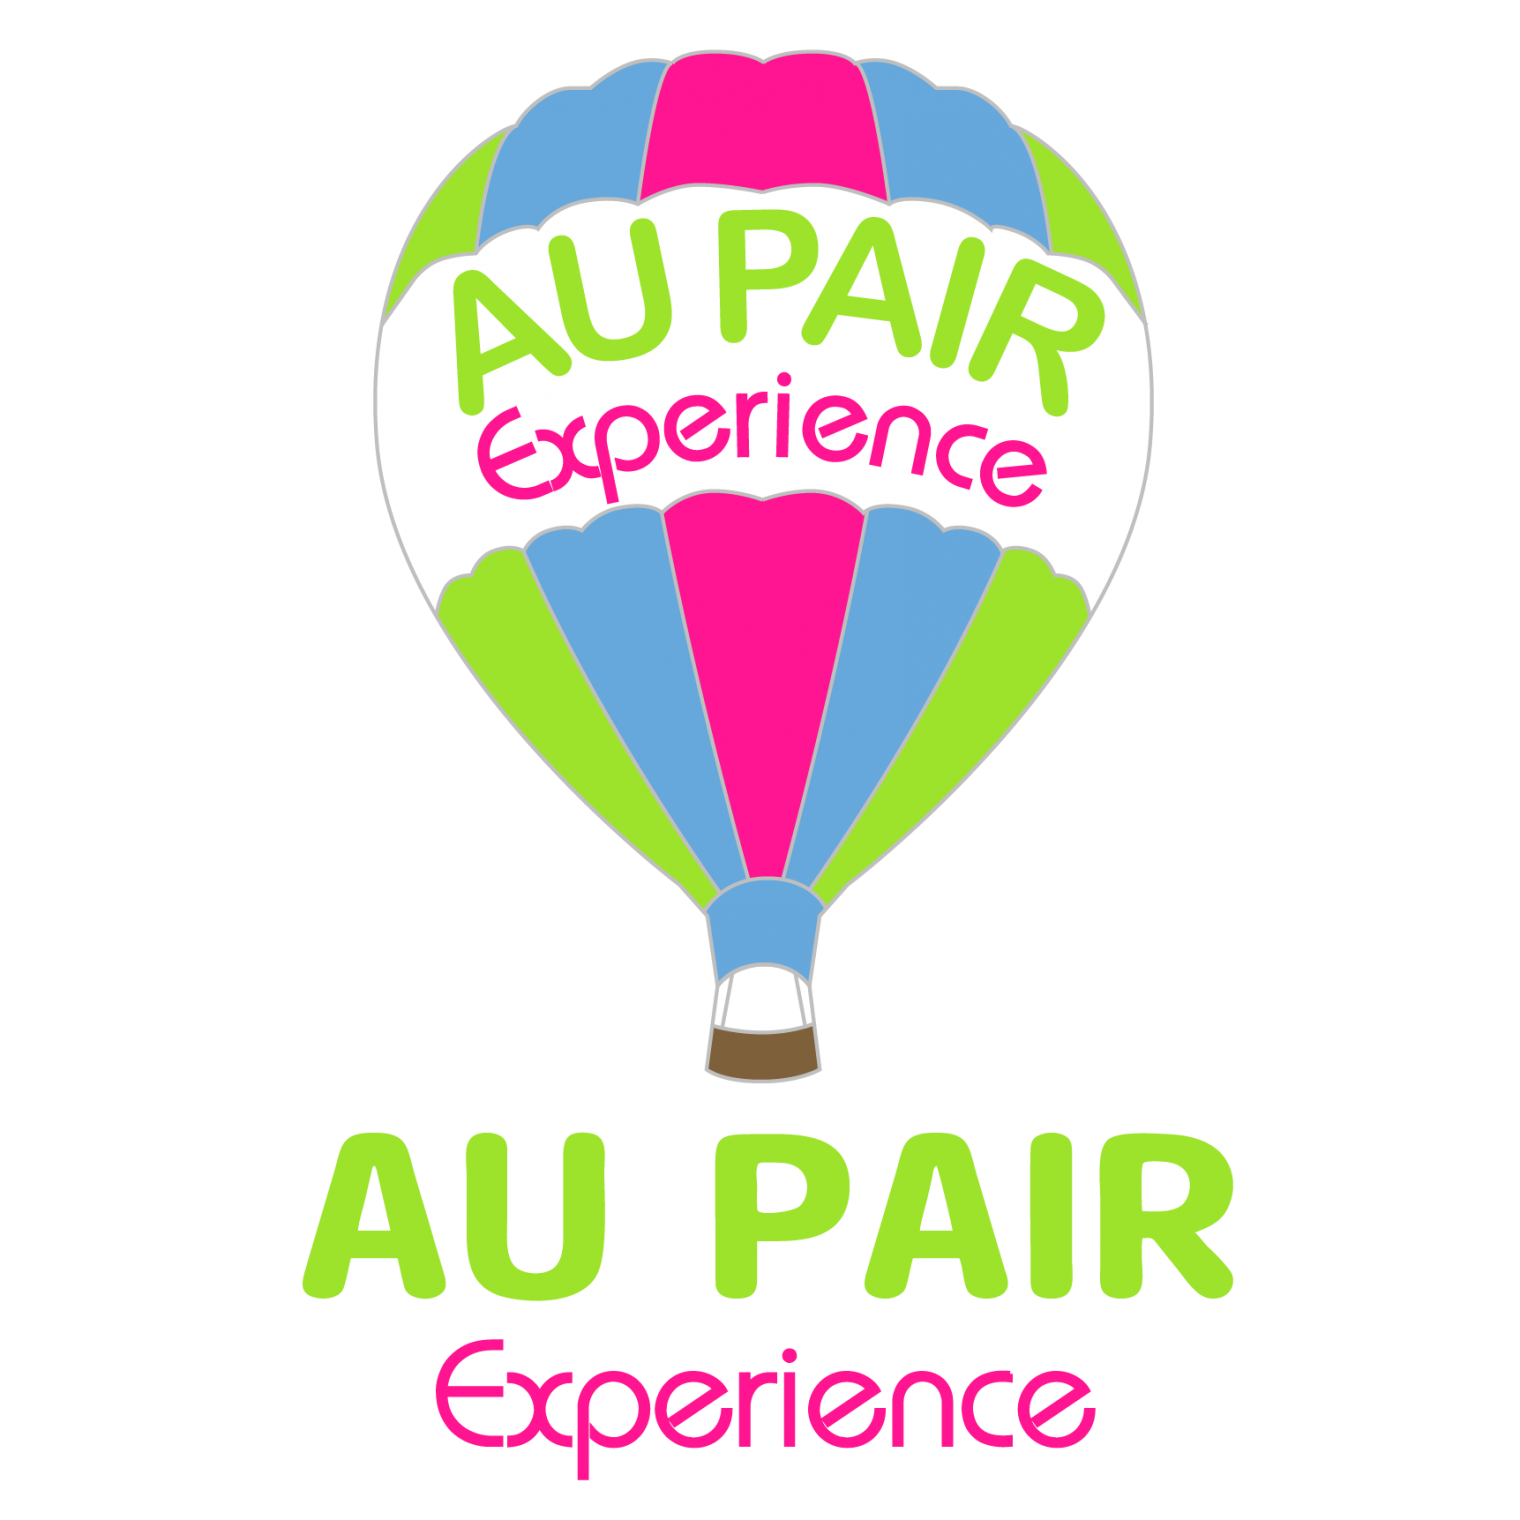 IAPA welcomes Au Pair Experience and Travel as the latest Affiliate member